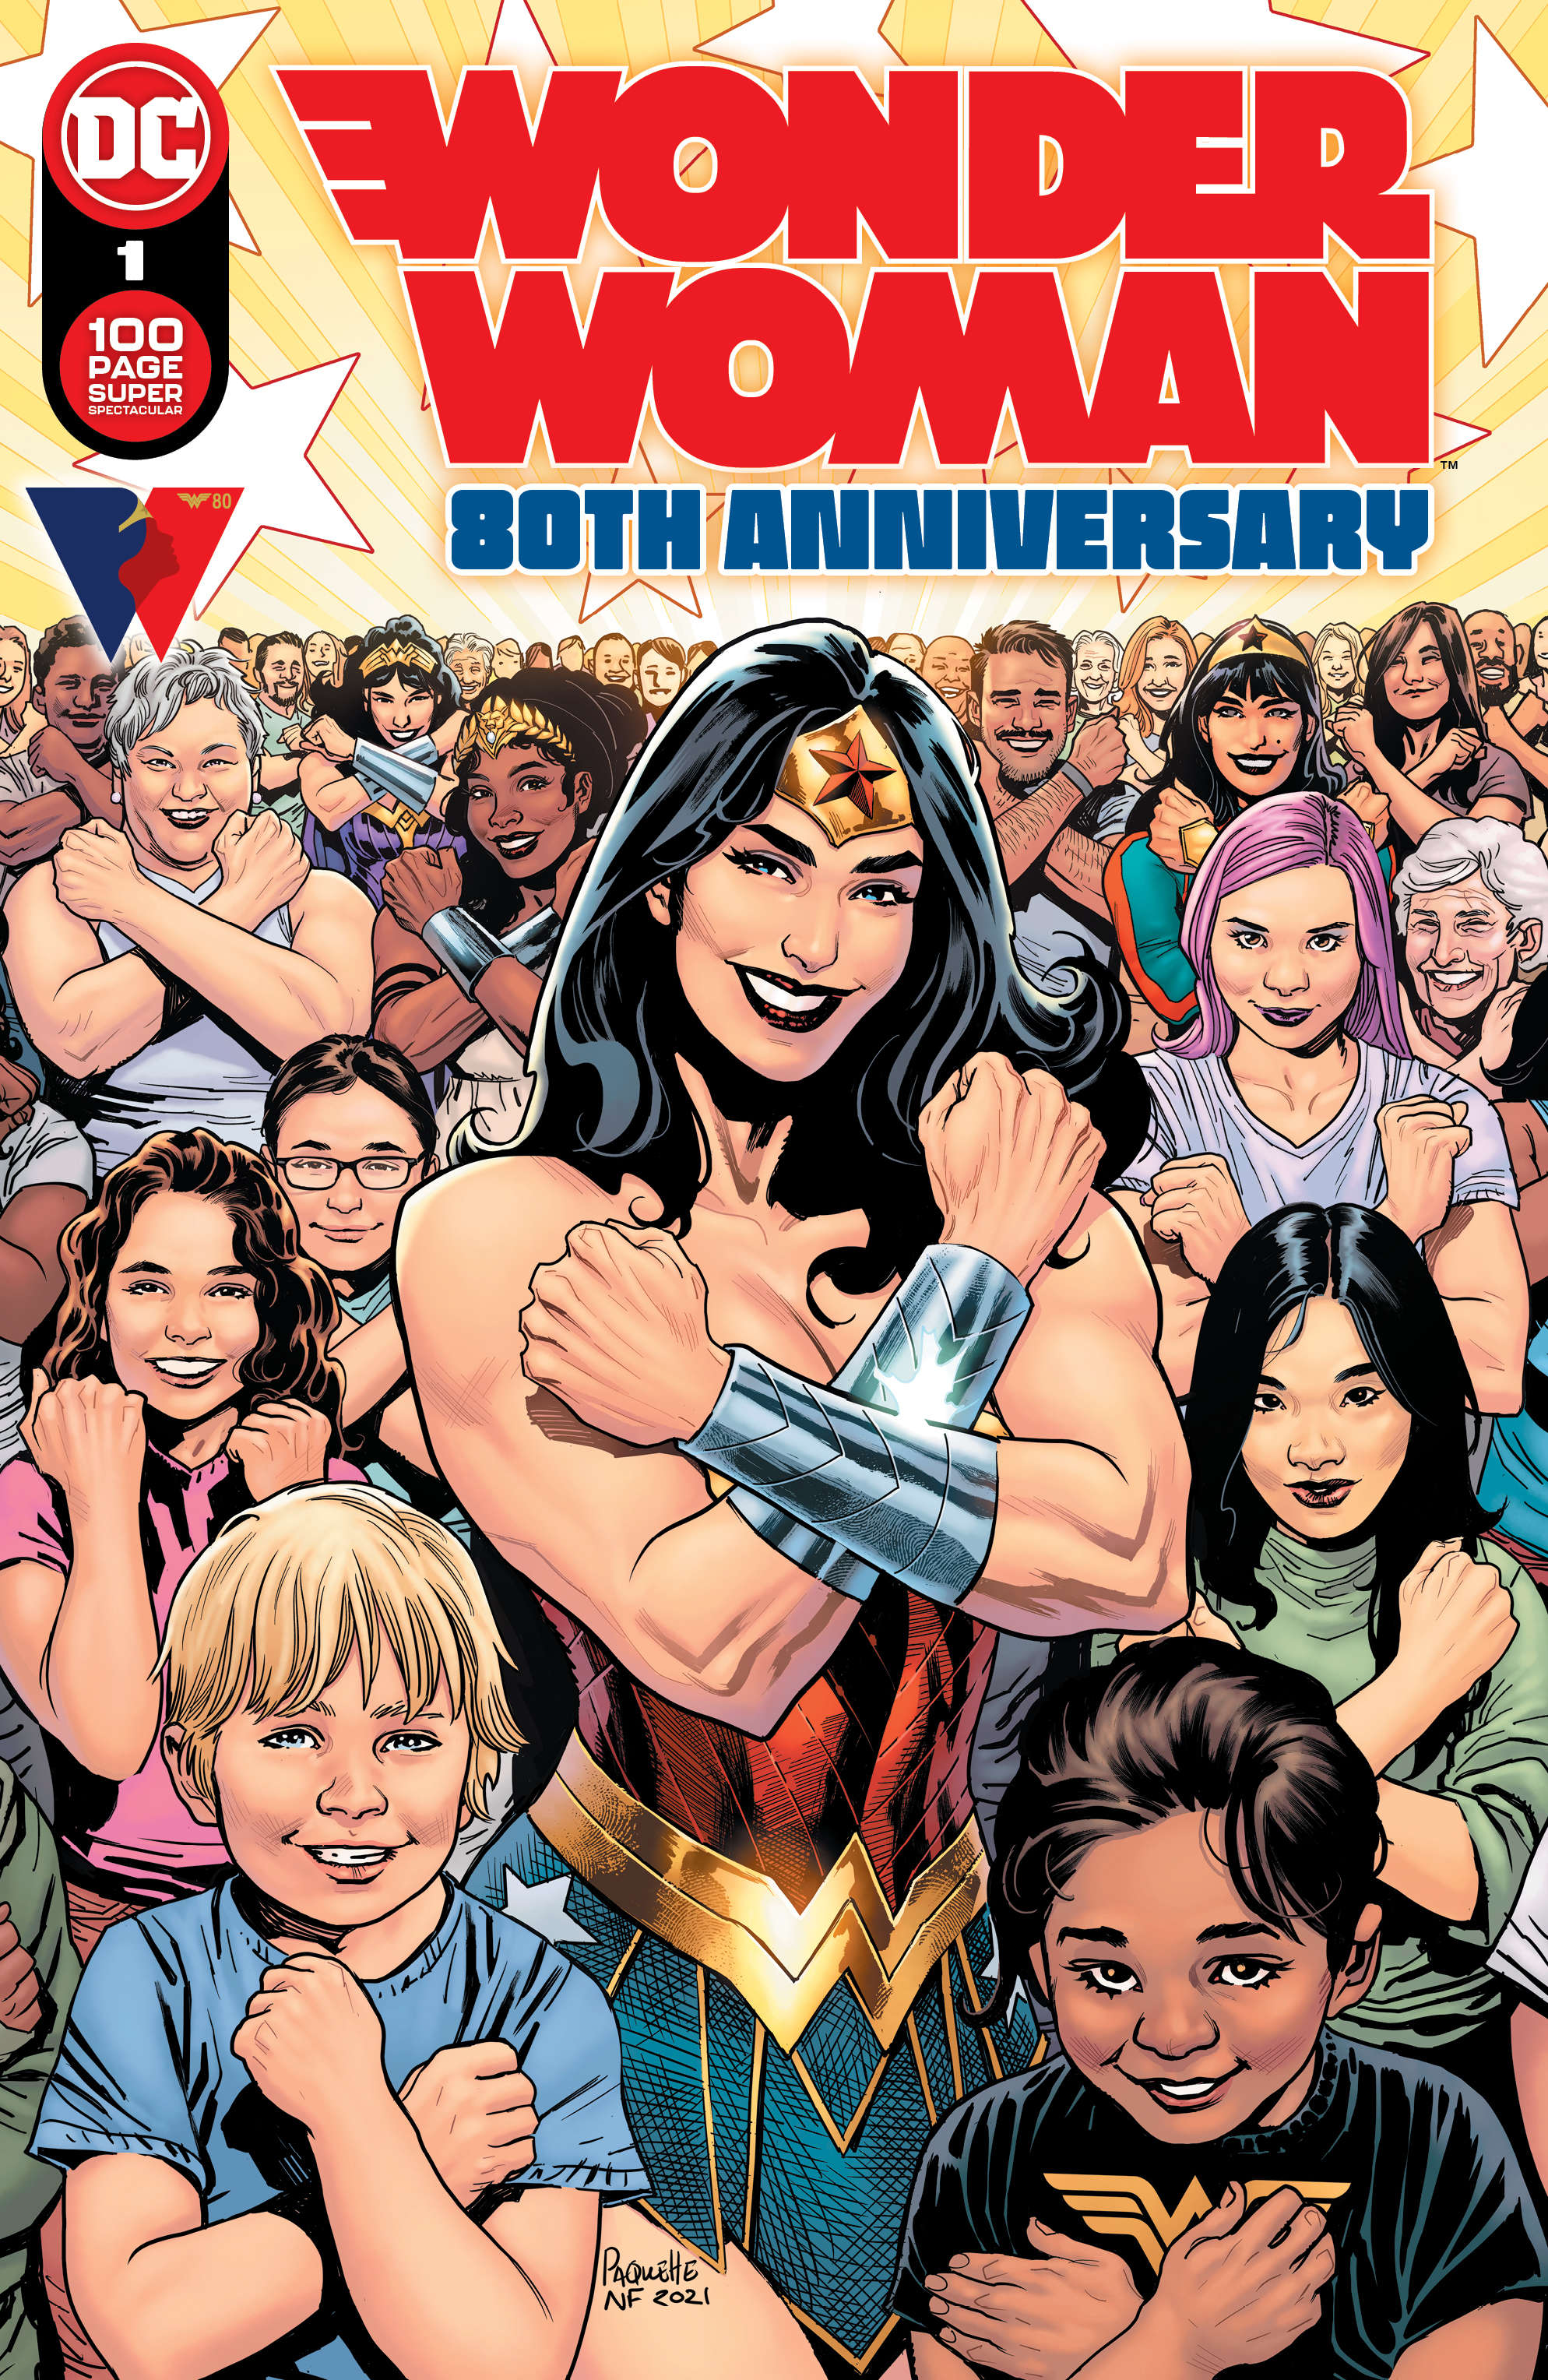 Wonder Woman 80th 100 Page Super Cover